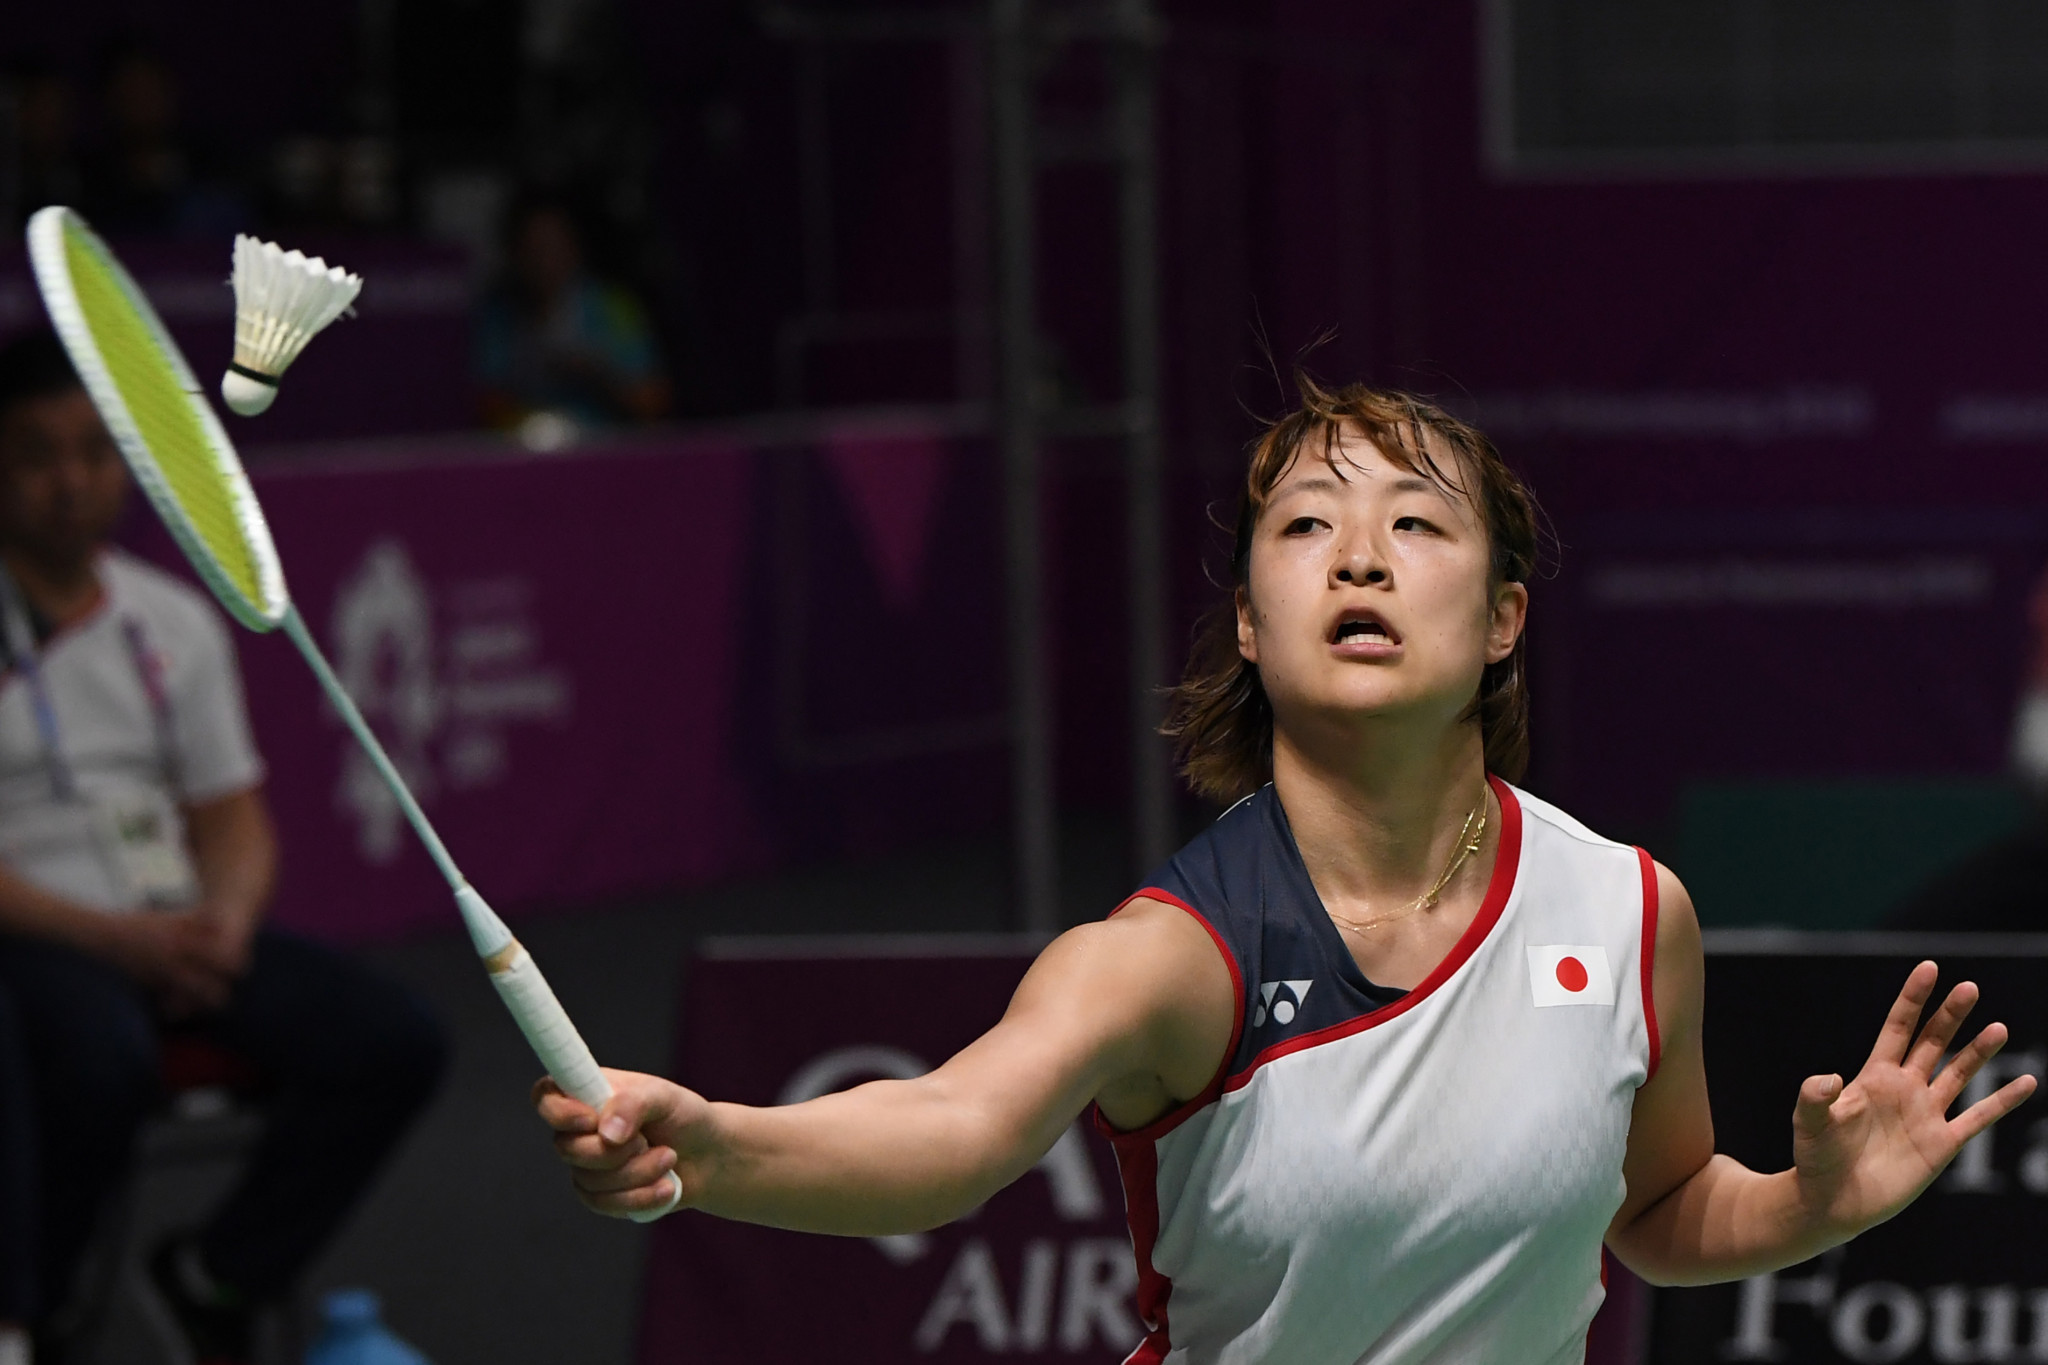 Nozomi Okuhara contributed to Japan claiming the women's team badminton gold medal at the expense of China ©Getty Images